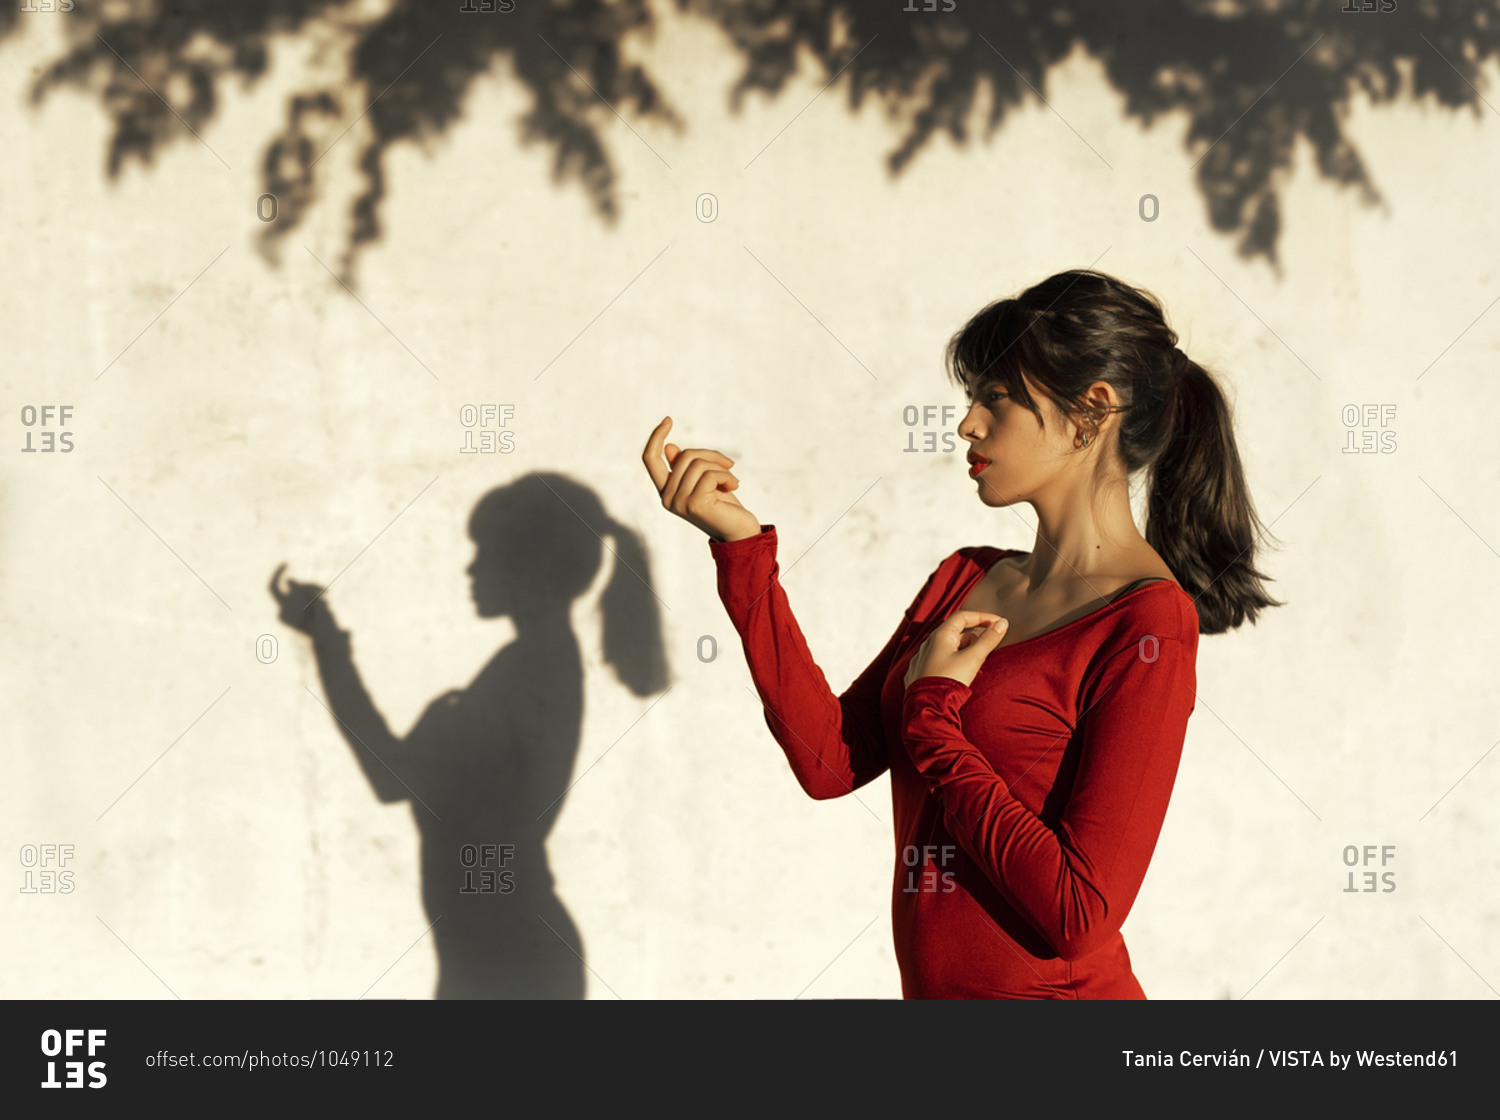 Contemplating woman doing hand gesture while standing by tree shadow